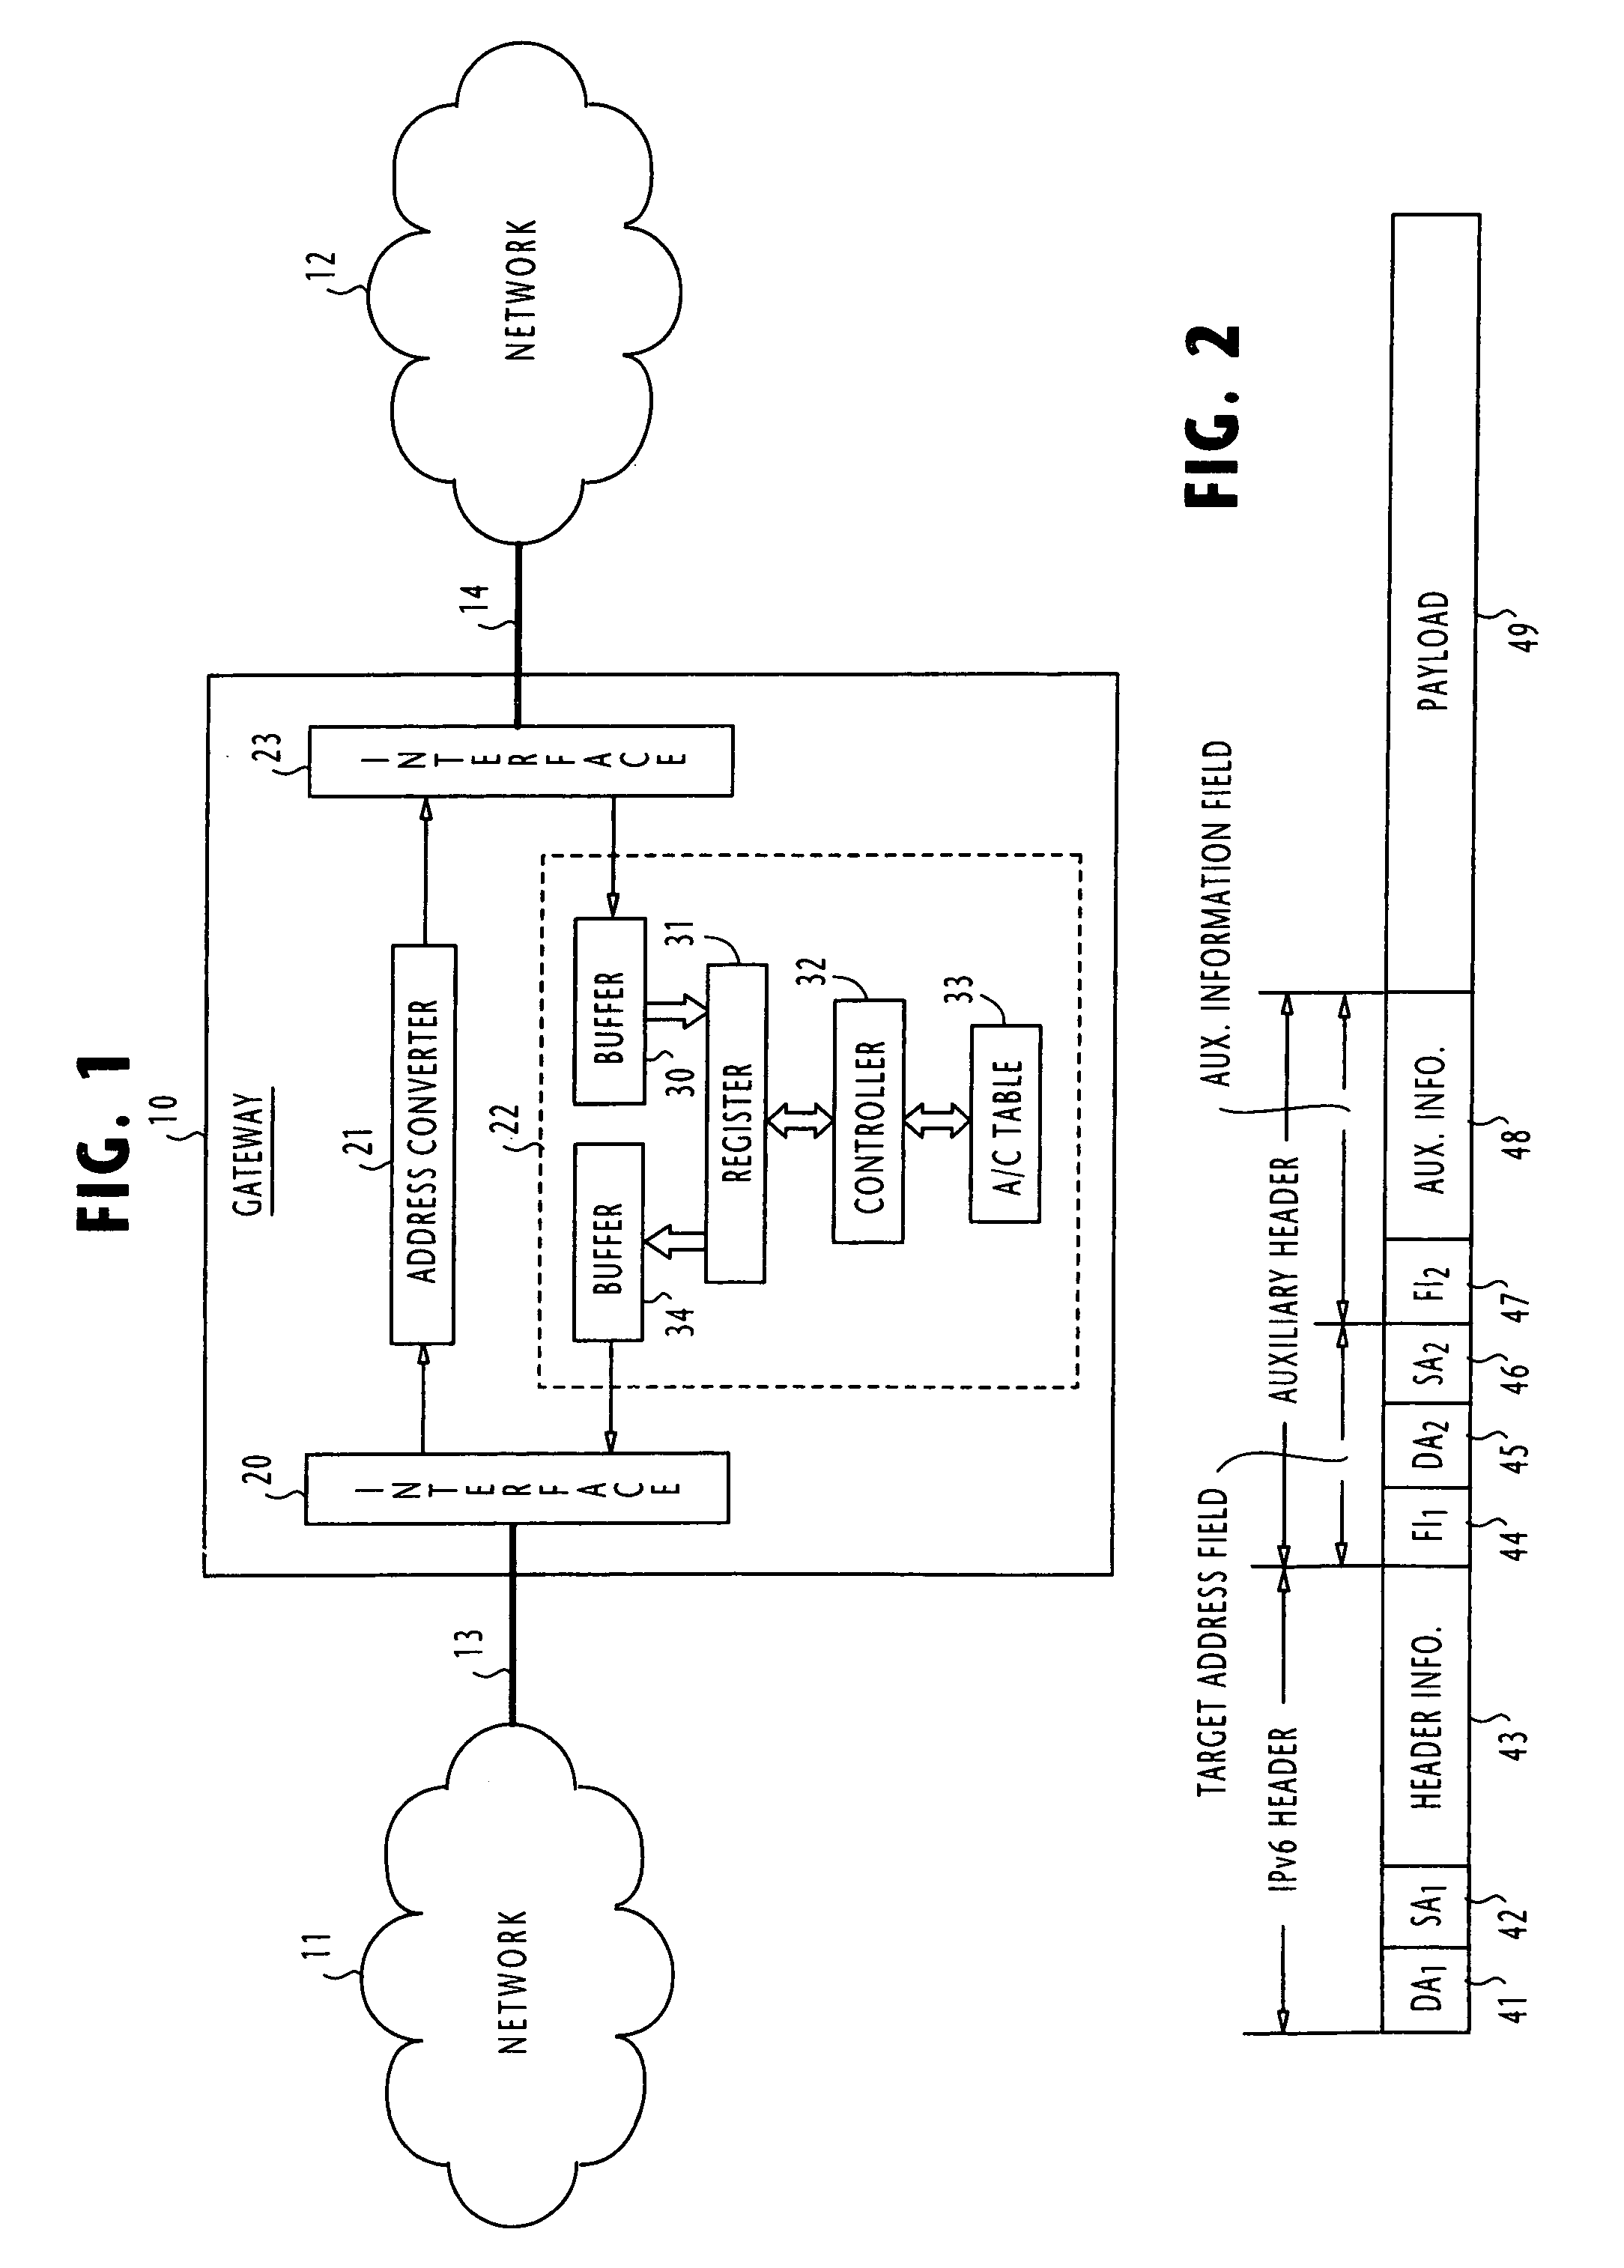 Address converter for gateways interconnecting networks of different address formats